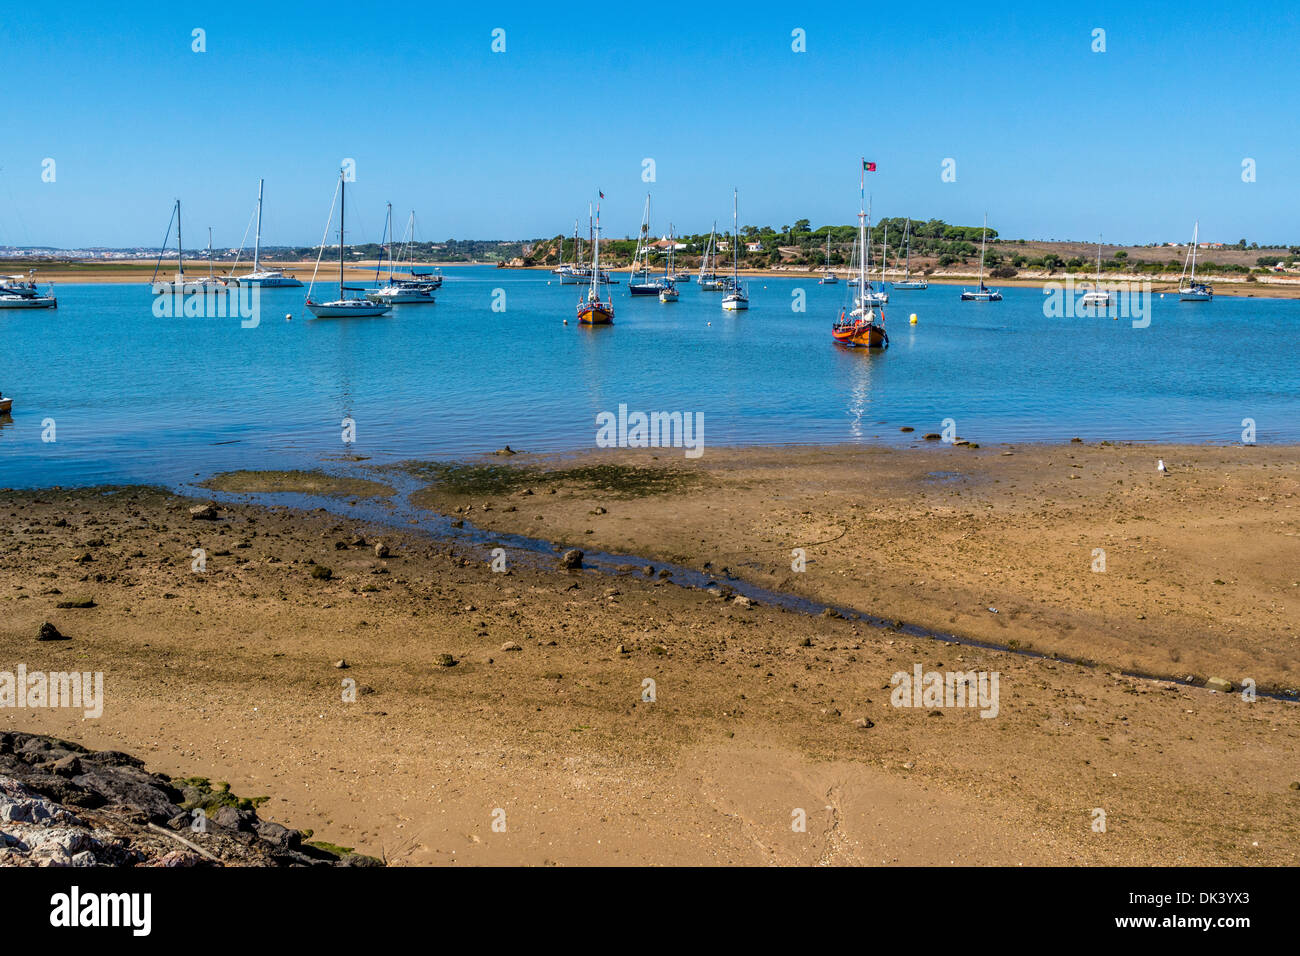 Sandy beach looking out at the harbour with a Blue Sky and small boats Stock Photo